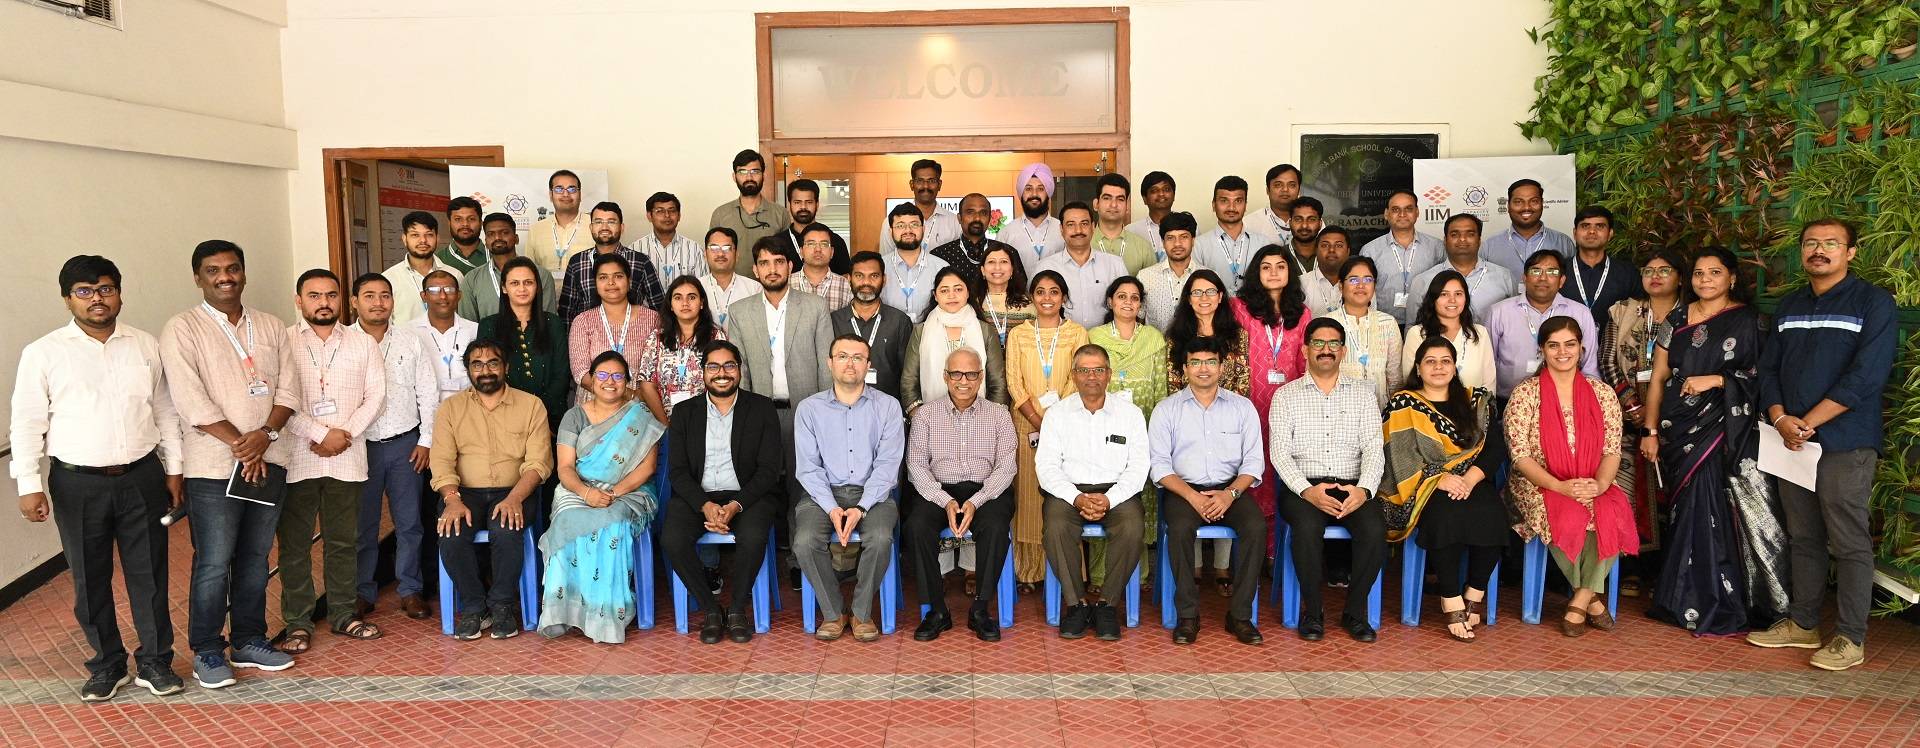 Young Scientist Induction Program - Inauguration of Module-3 (Soft Skills) & Module-4 (Societal-relevance Skills)